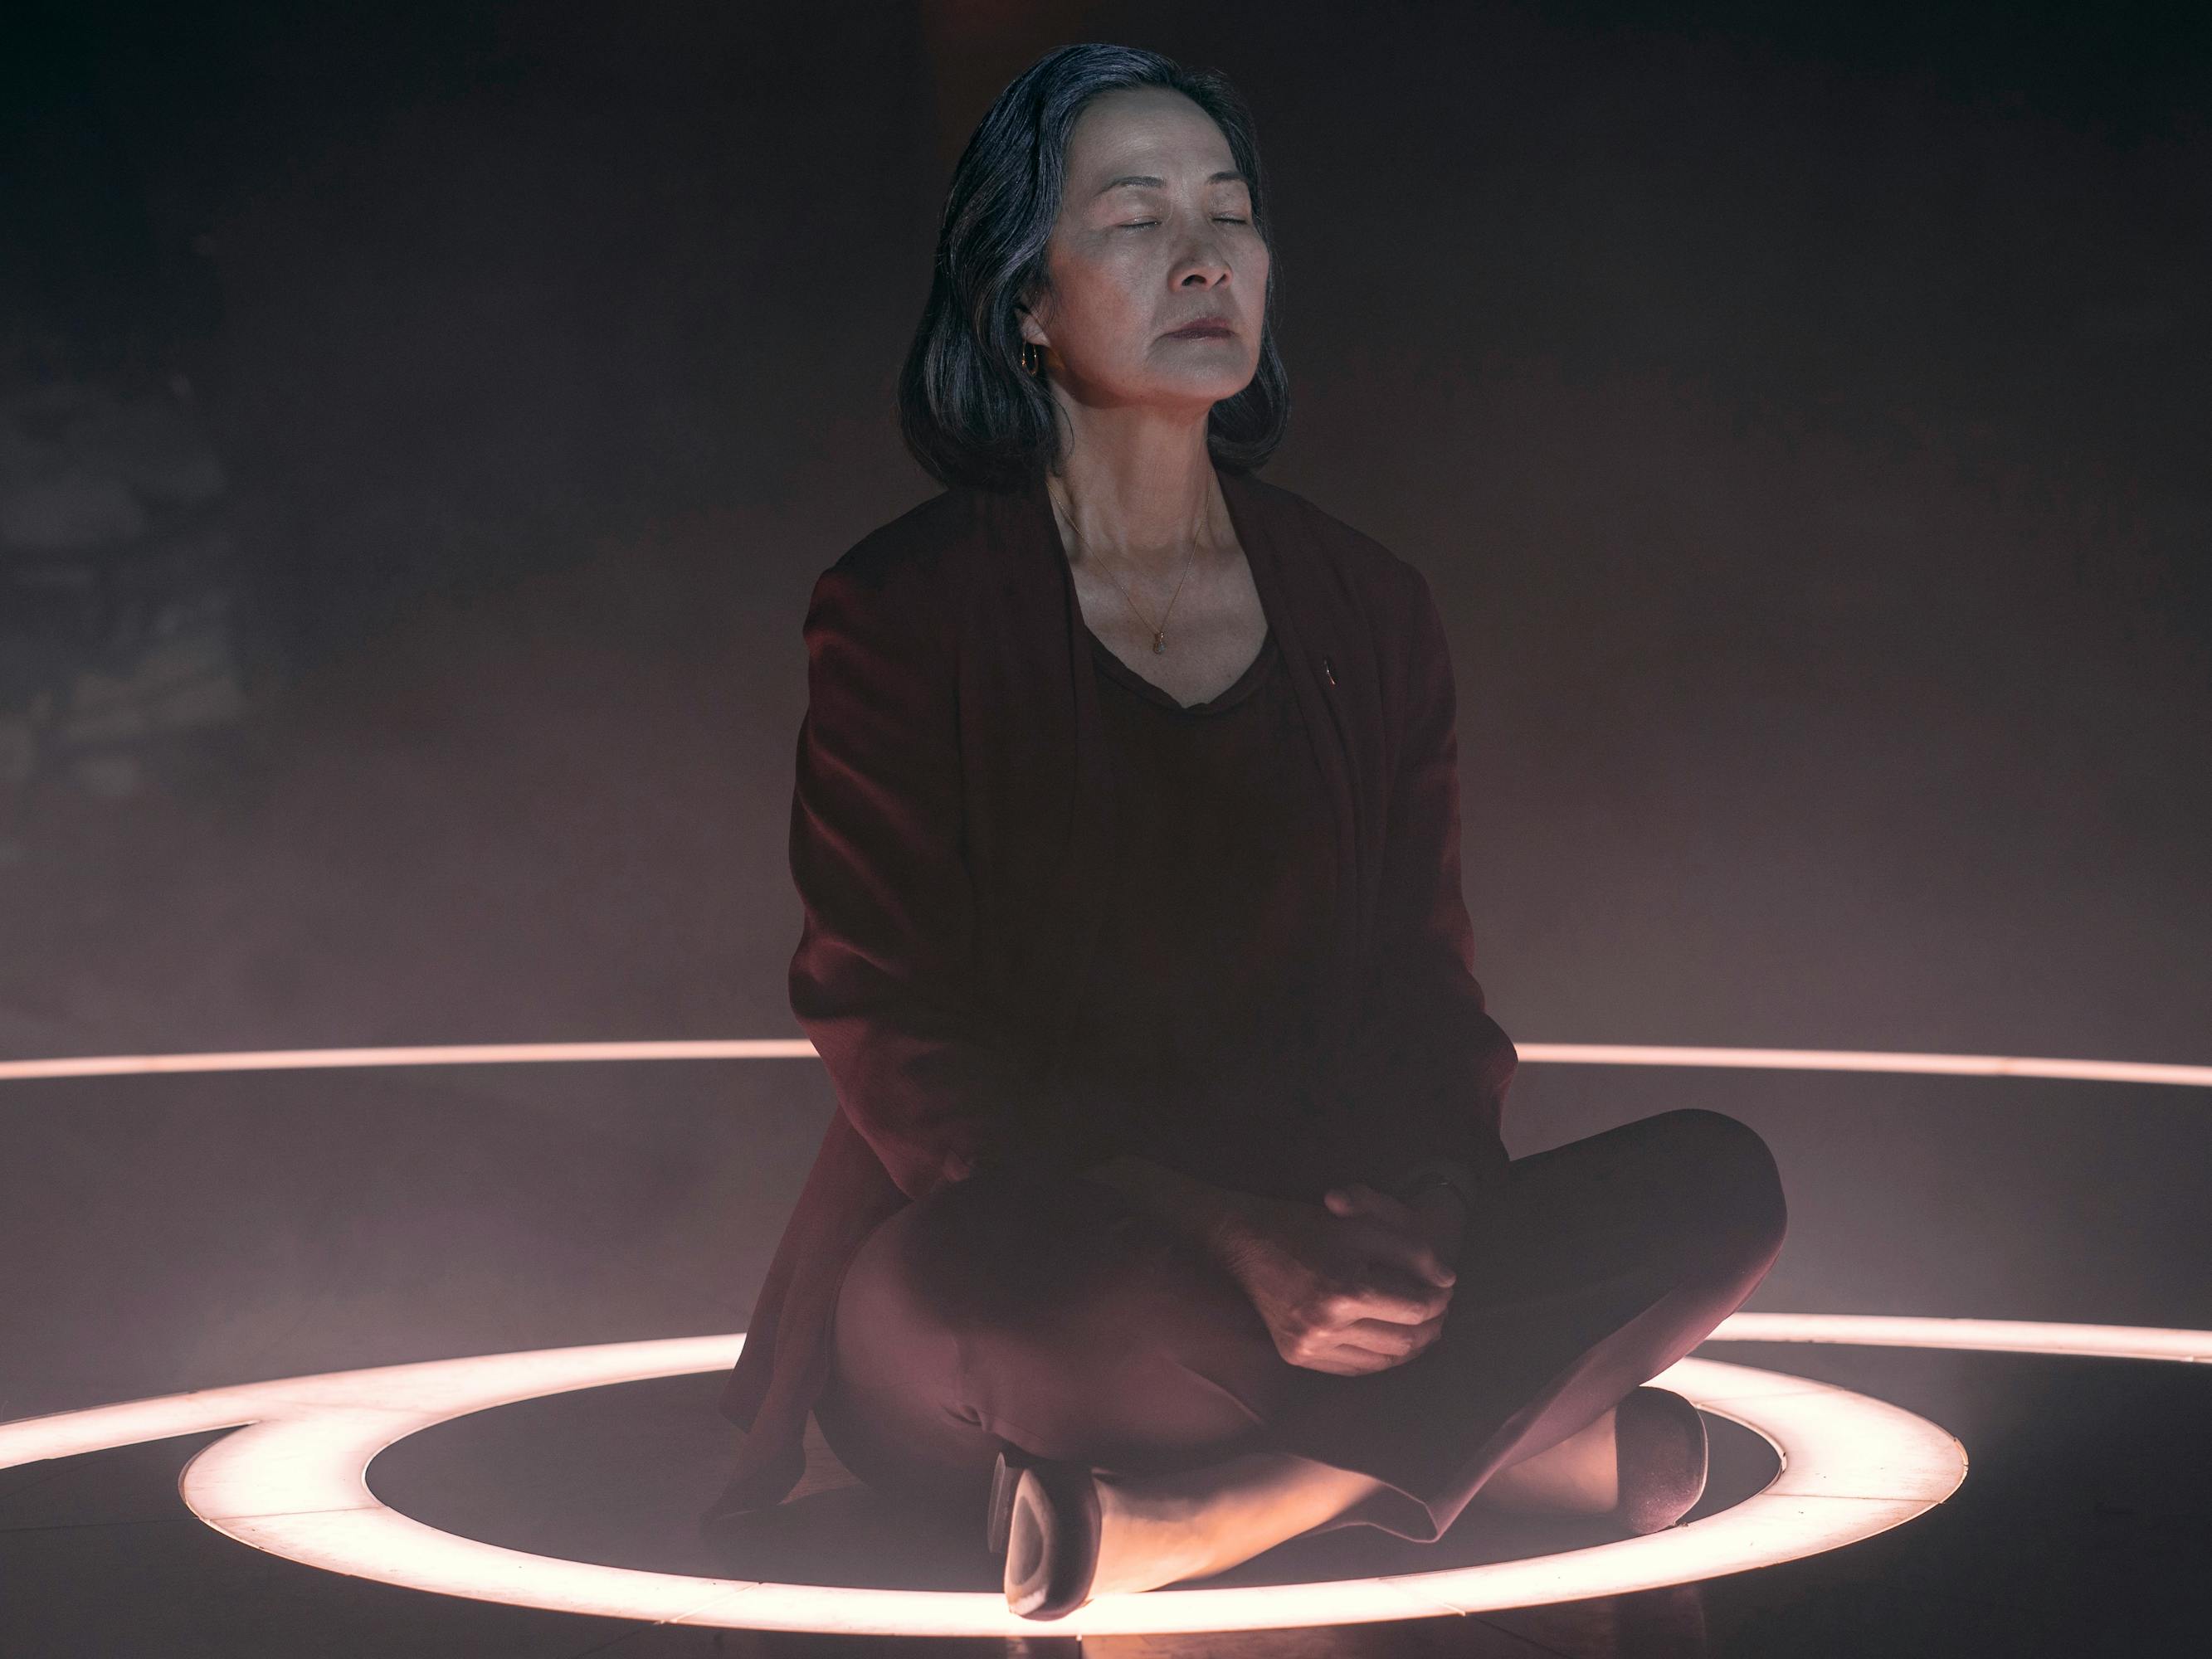 Ye Wenjie (Rosalind Chao) sits on a circle of light, with her legs crossed and eyes closed.